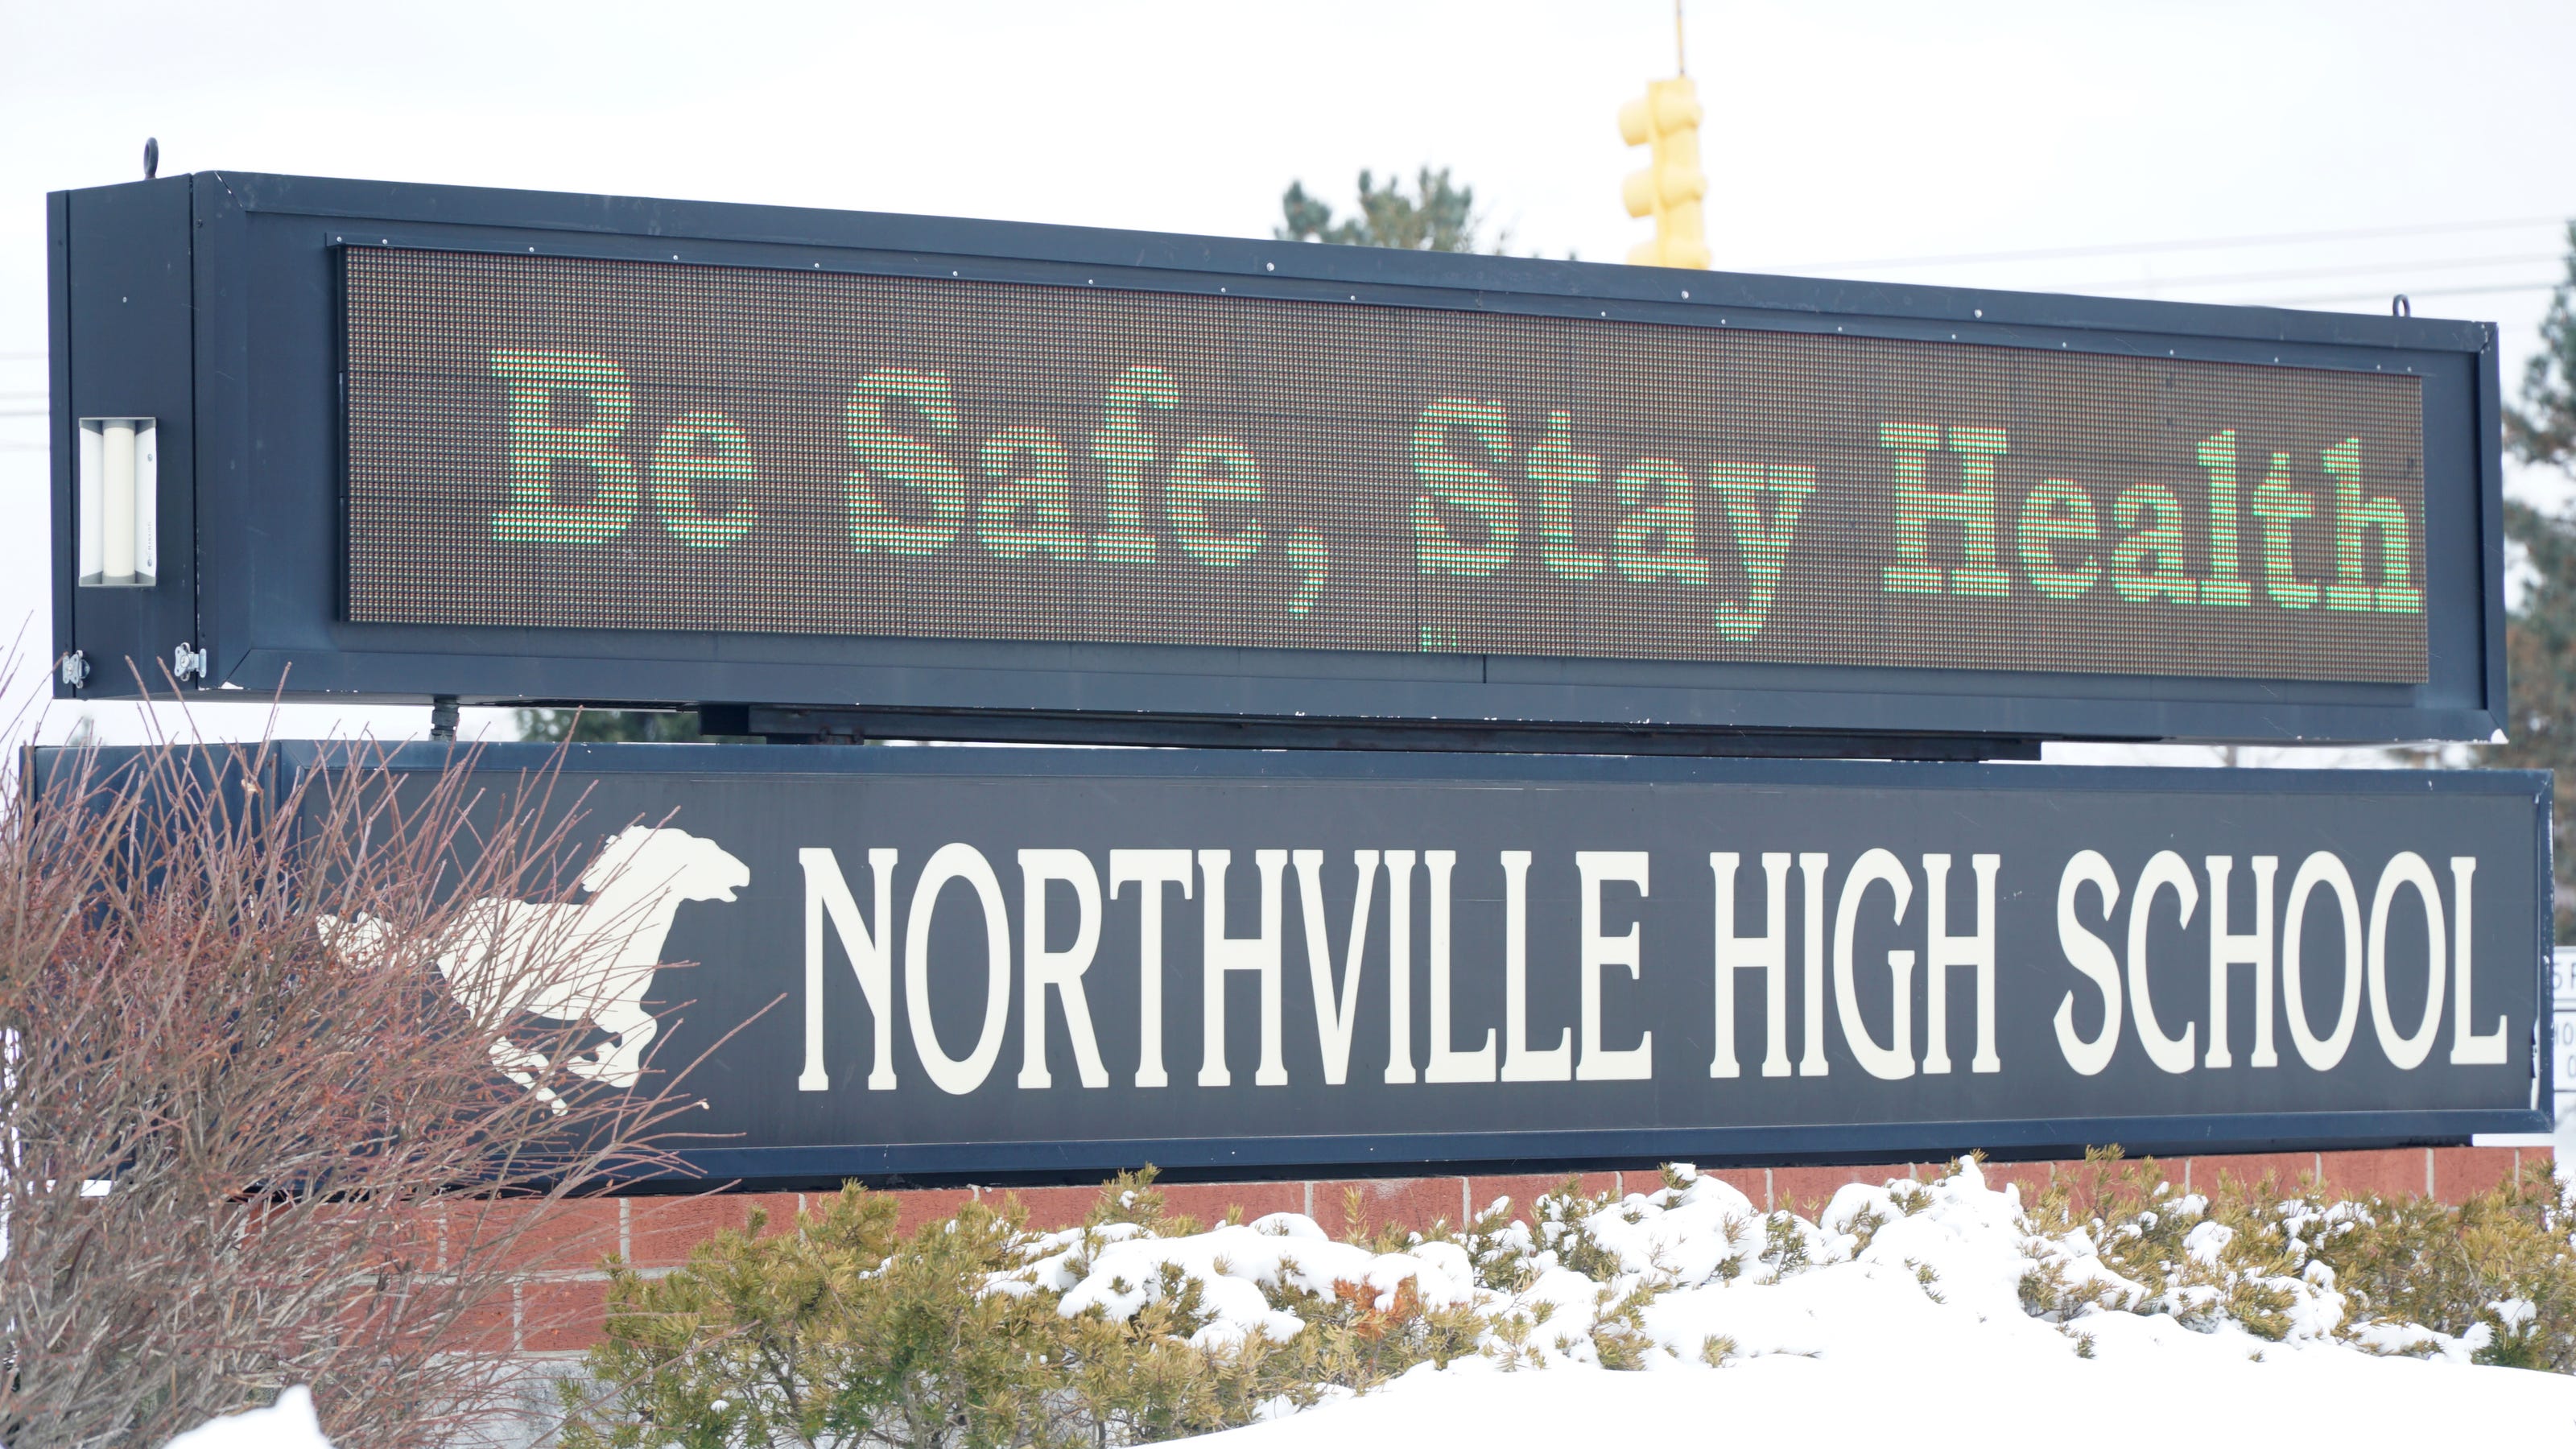 Northville High School students learning in-person since October